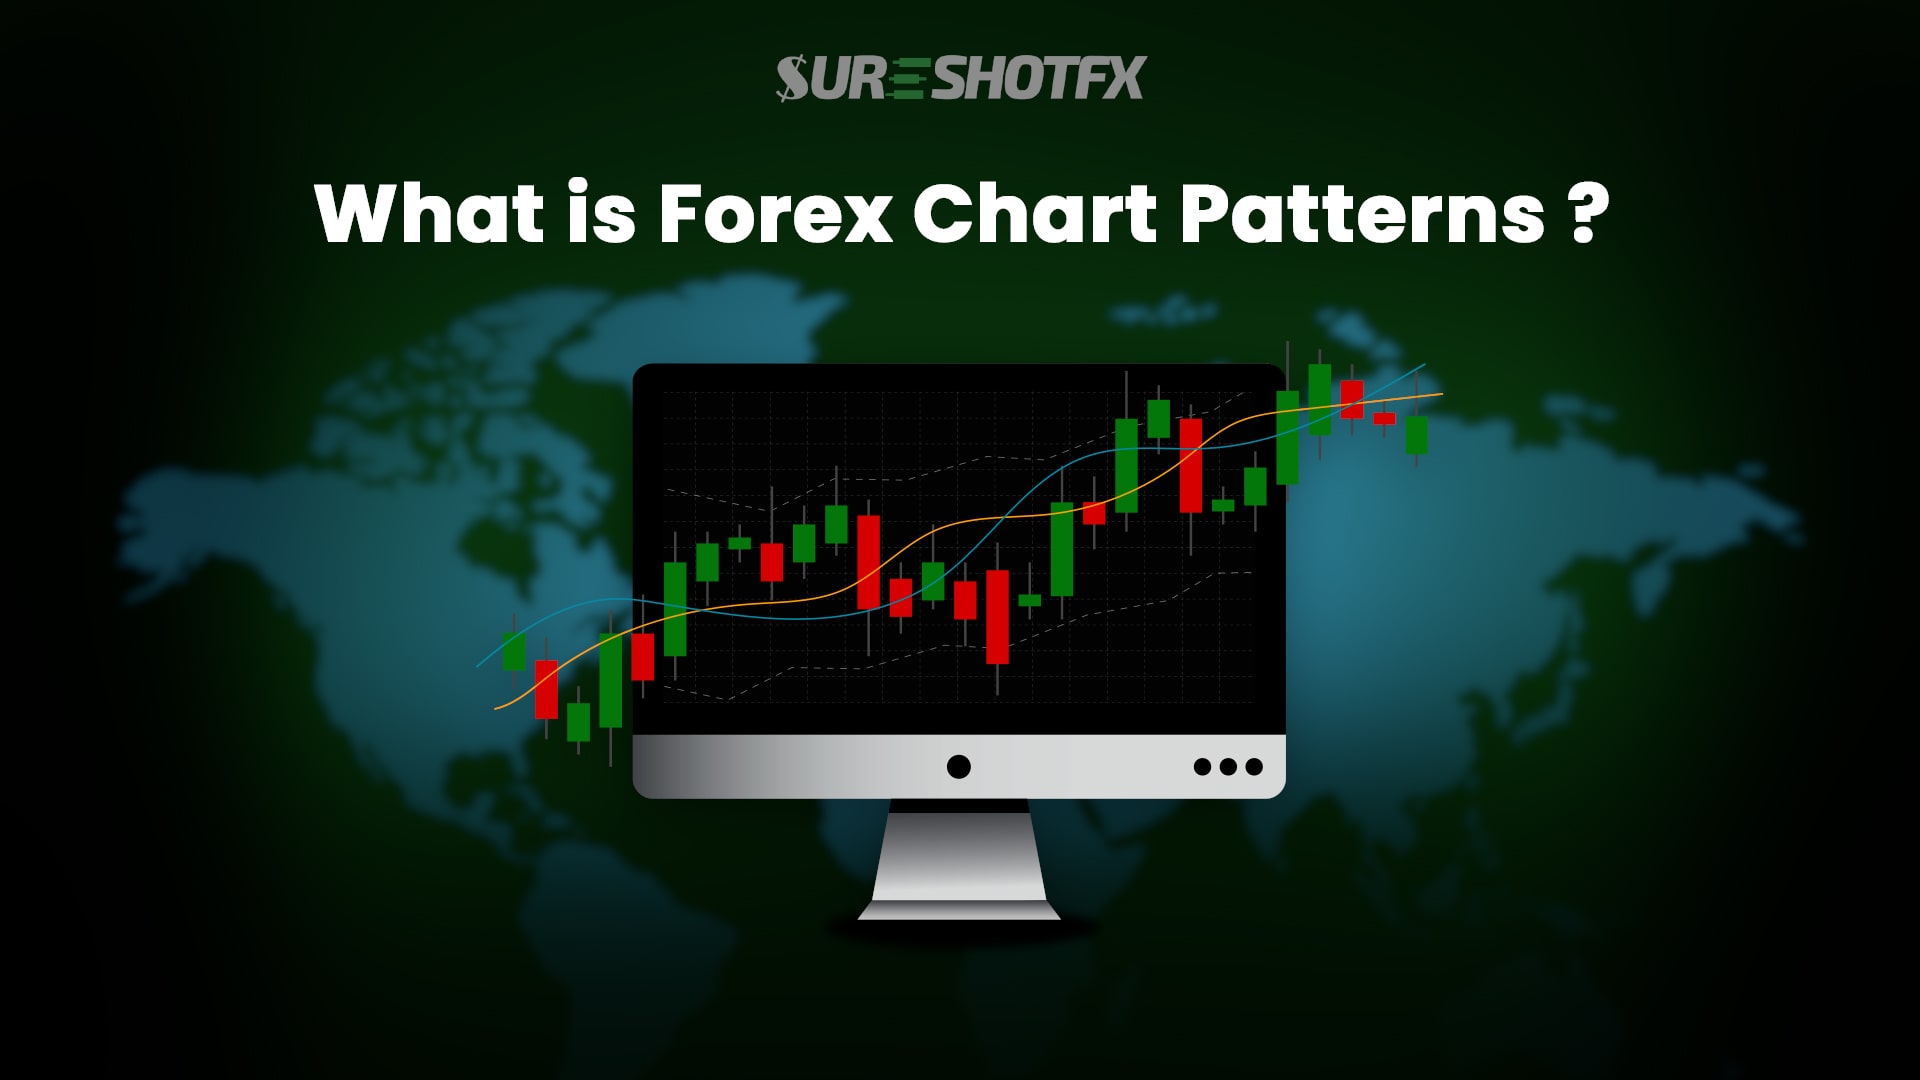 forex free course image - what is forex chart pattern